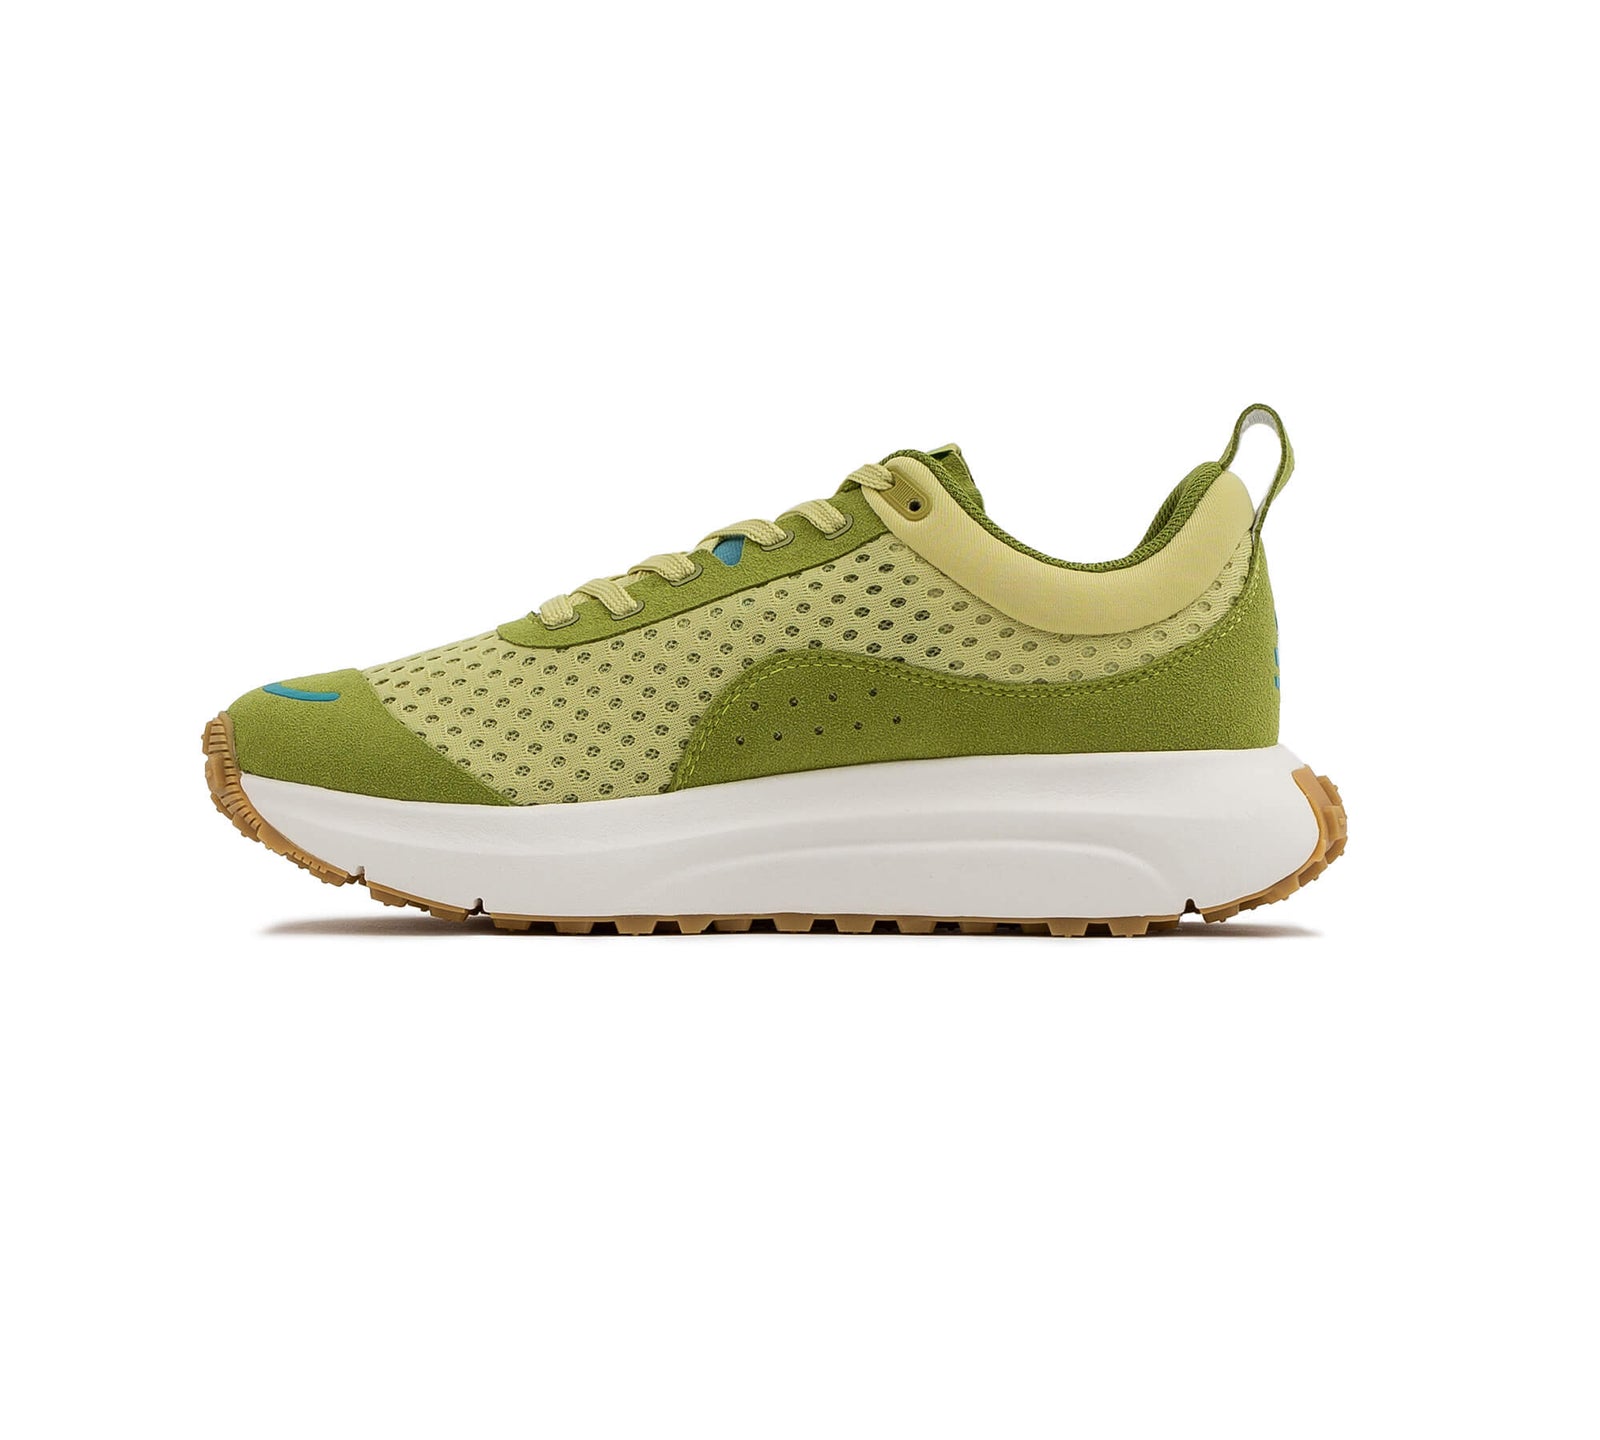 Interior side view of the right Everywhere Hilma Running Shoe in Linden Green